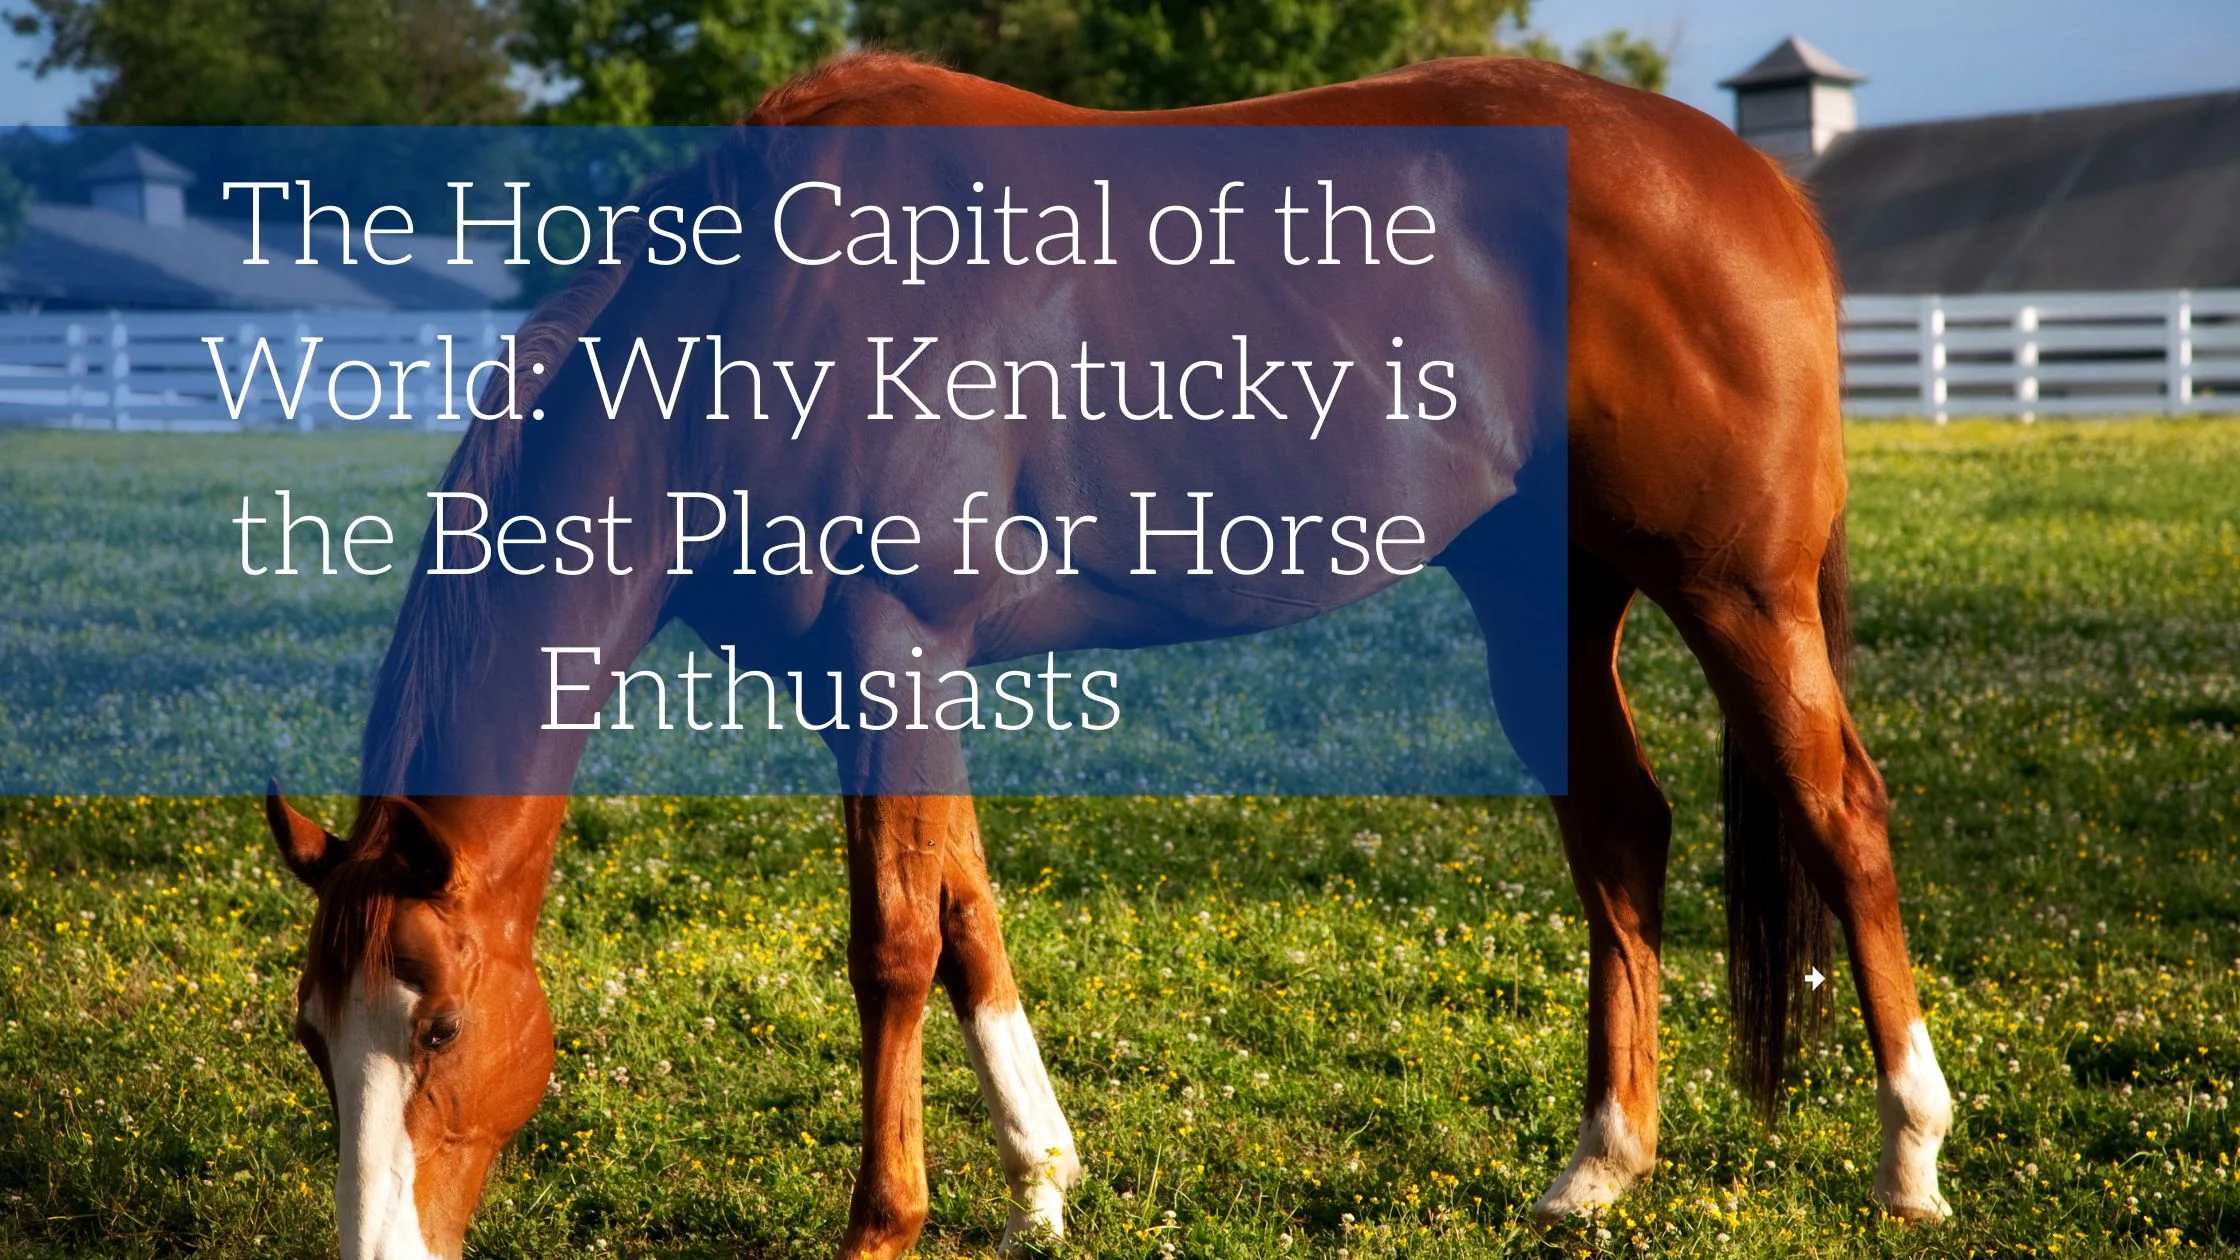 The Horse Capital of the World: Why Kentucky is the Best Place for Horse Enthusiasts